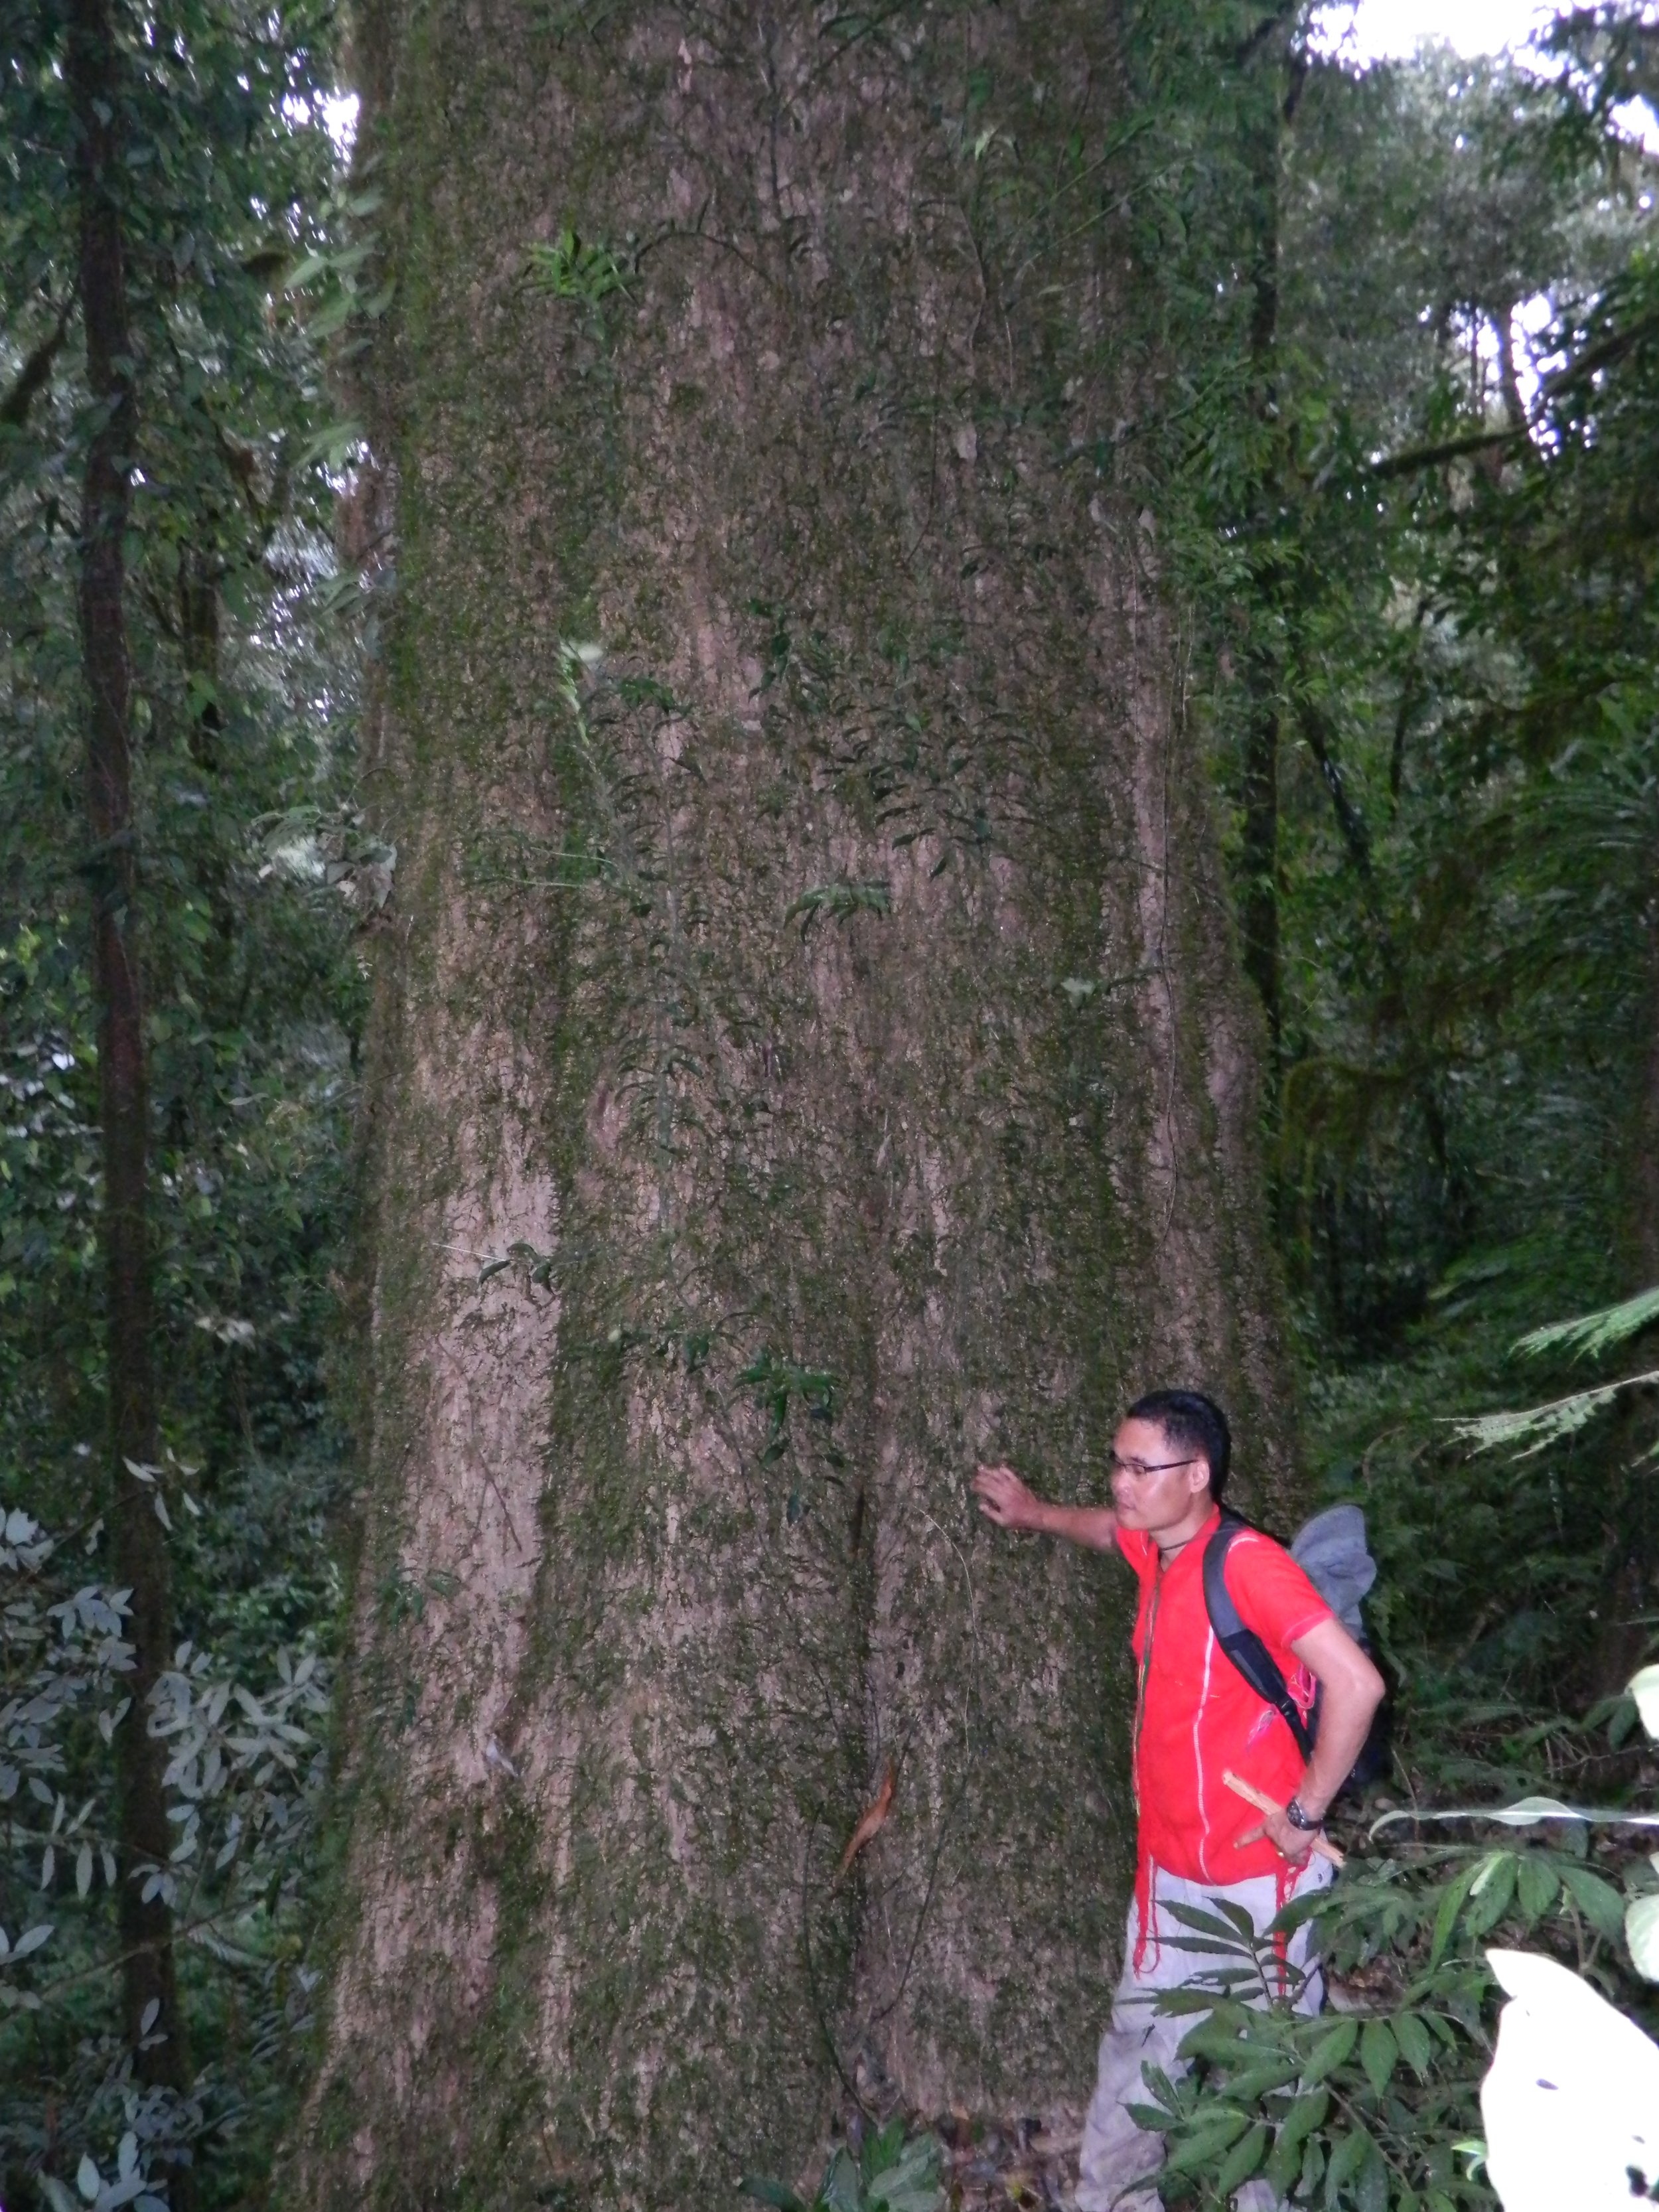 Old-growth giant in the Kheshorter Community Forest, Salween Peace Park